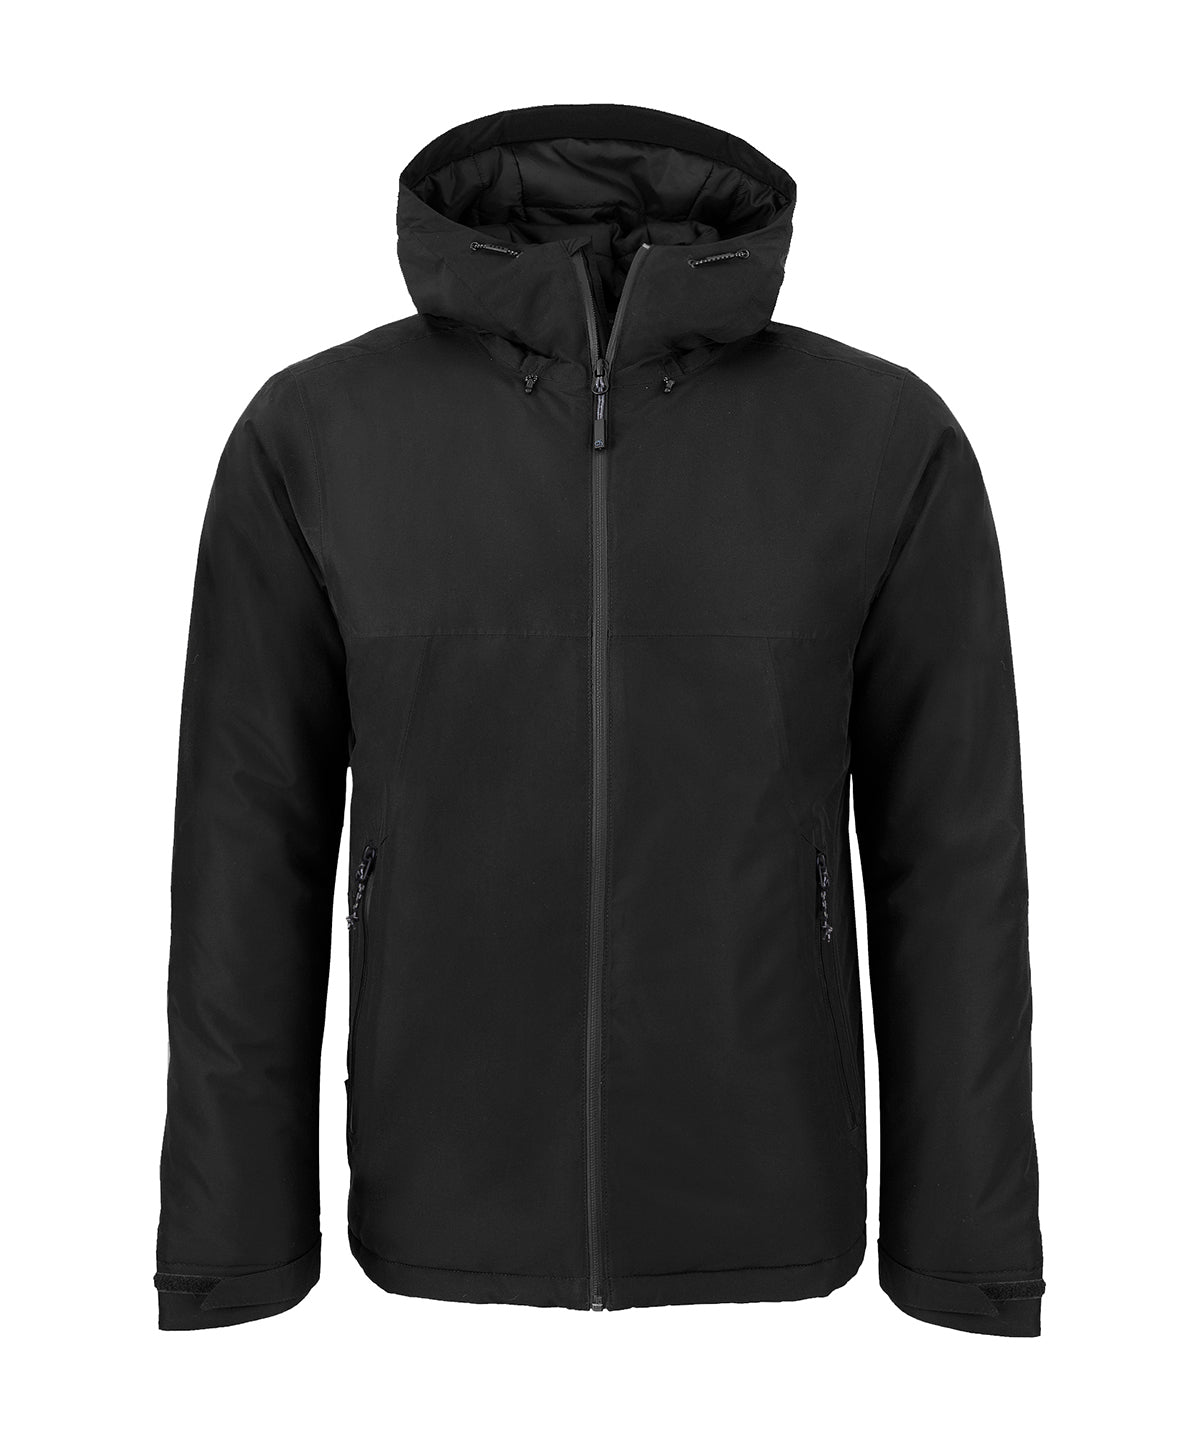 Expert thermic insulated jacket | Black